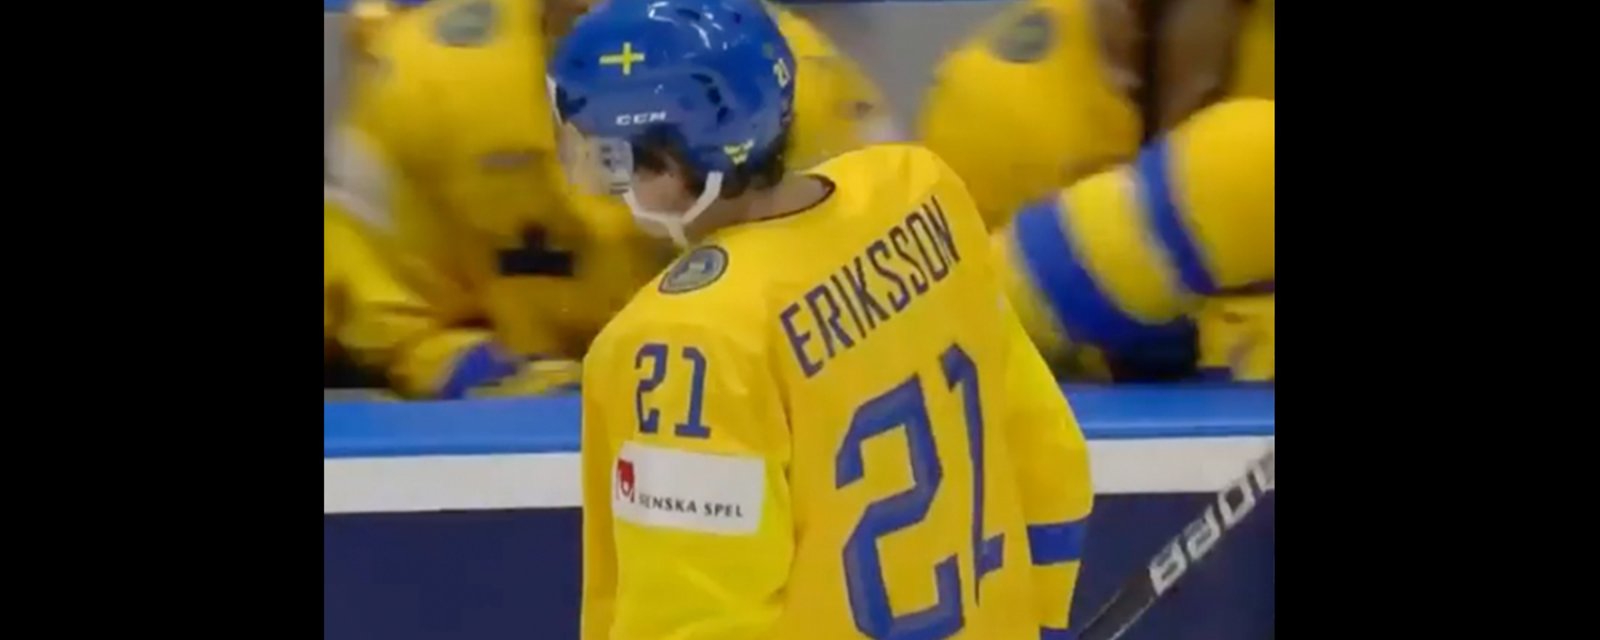 Sweden gives up awful, heartbreaking goal against Latvia at IIHF World Championships  